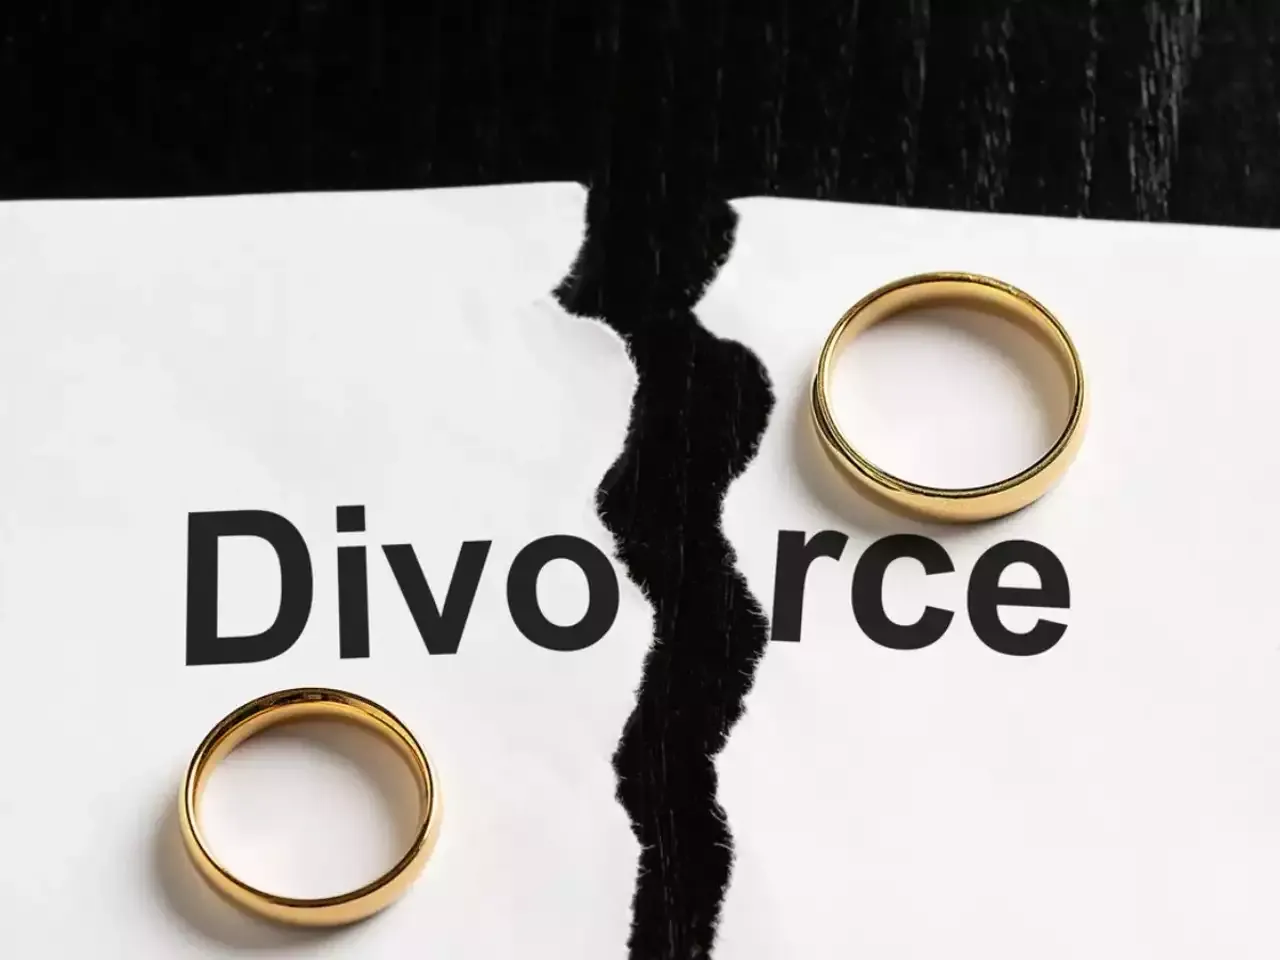 The city with the highest divorce rate in Arizona is Sierra Vista